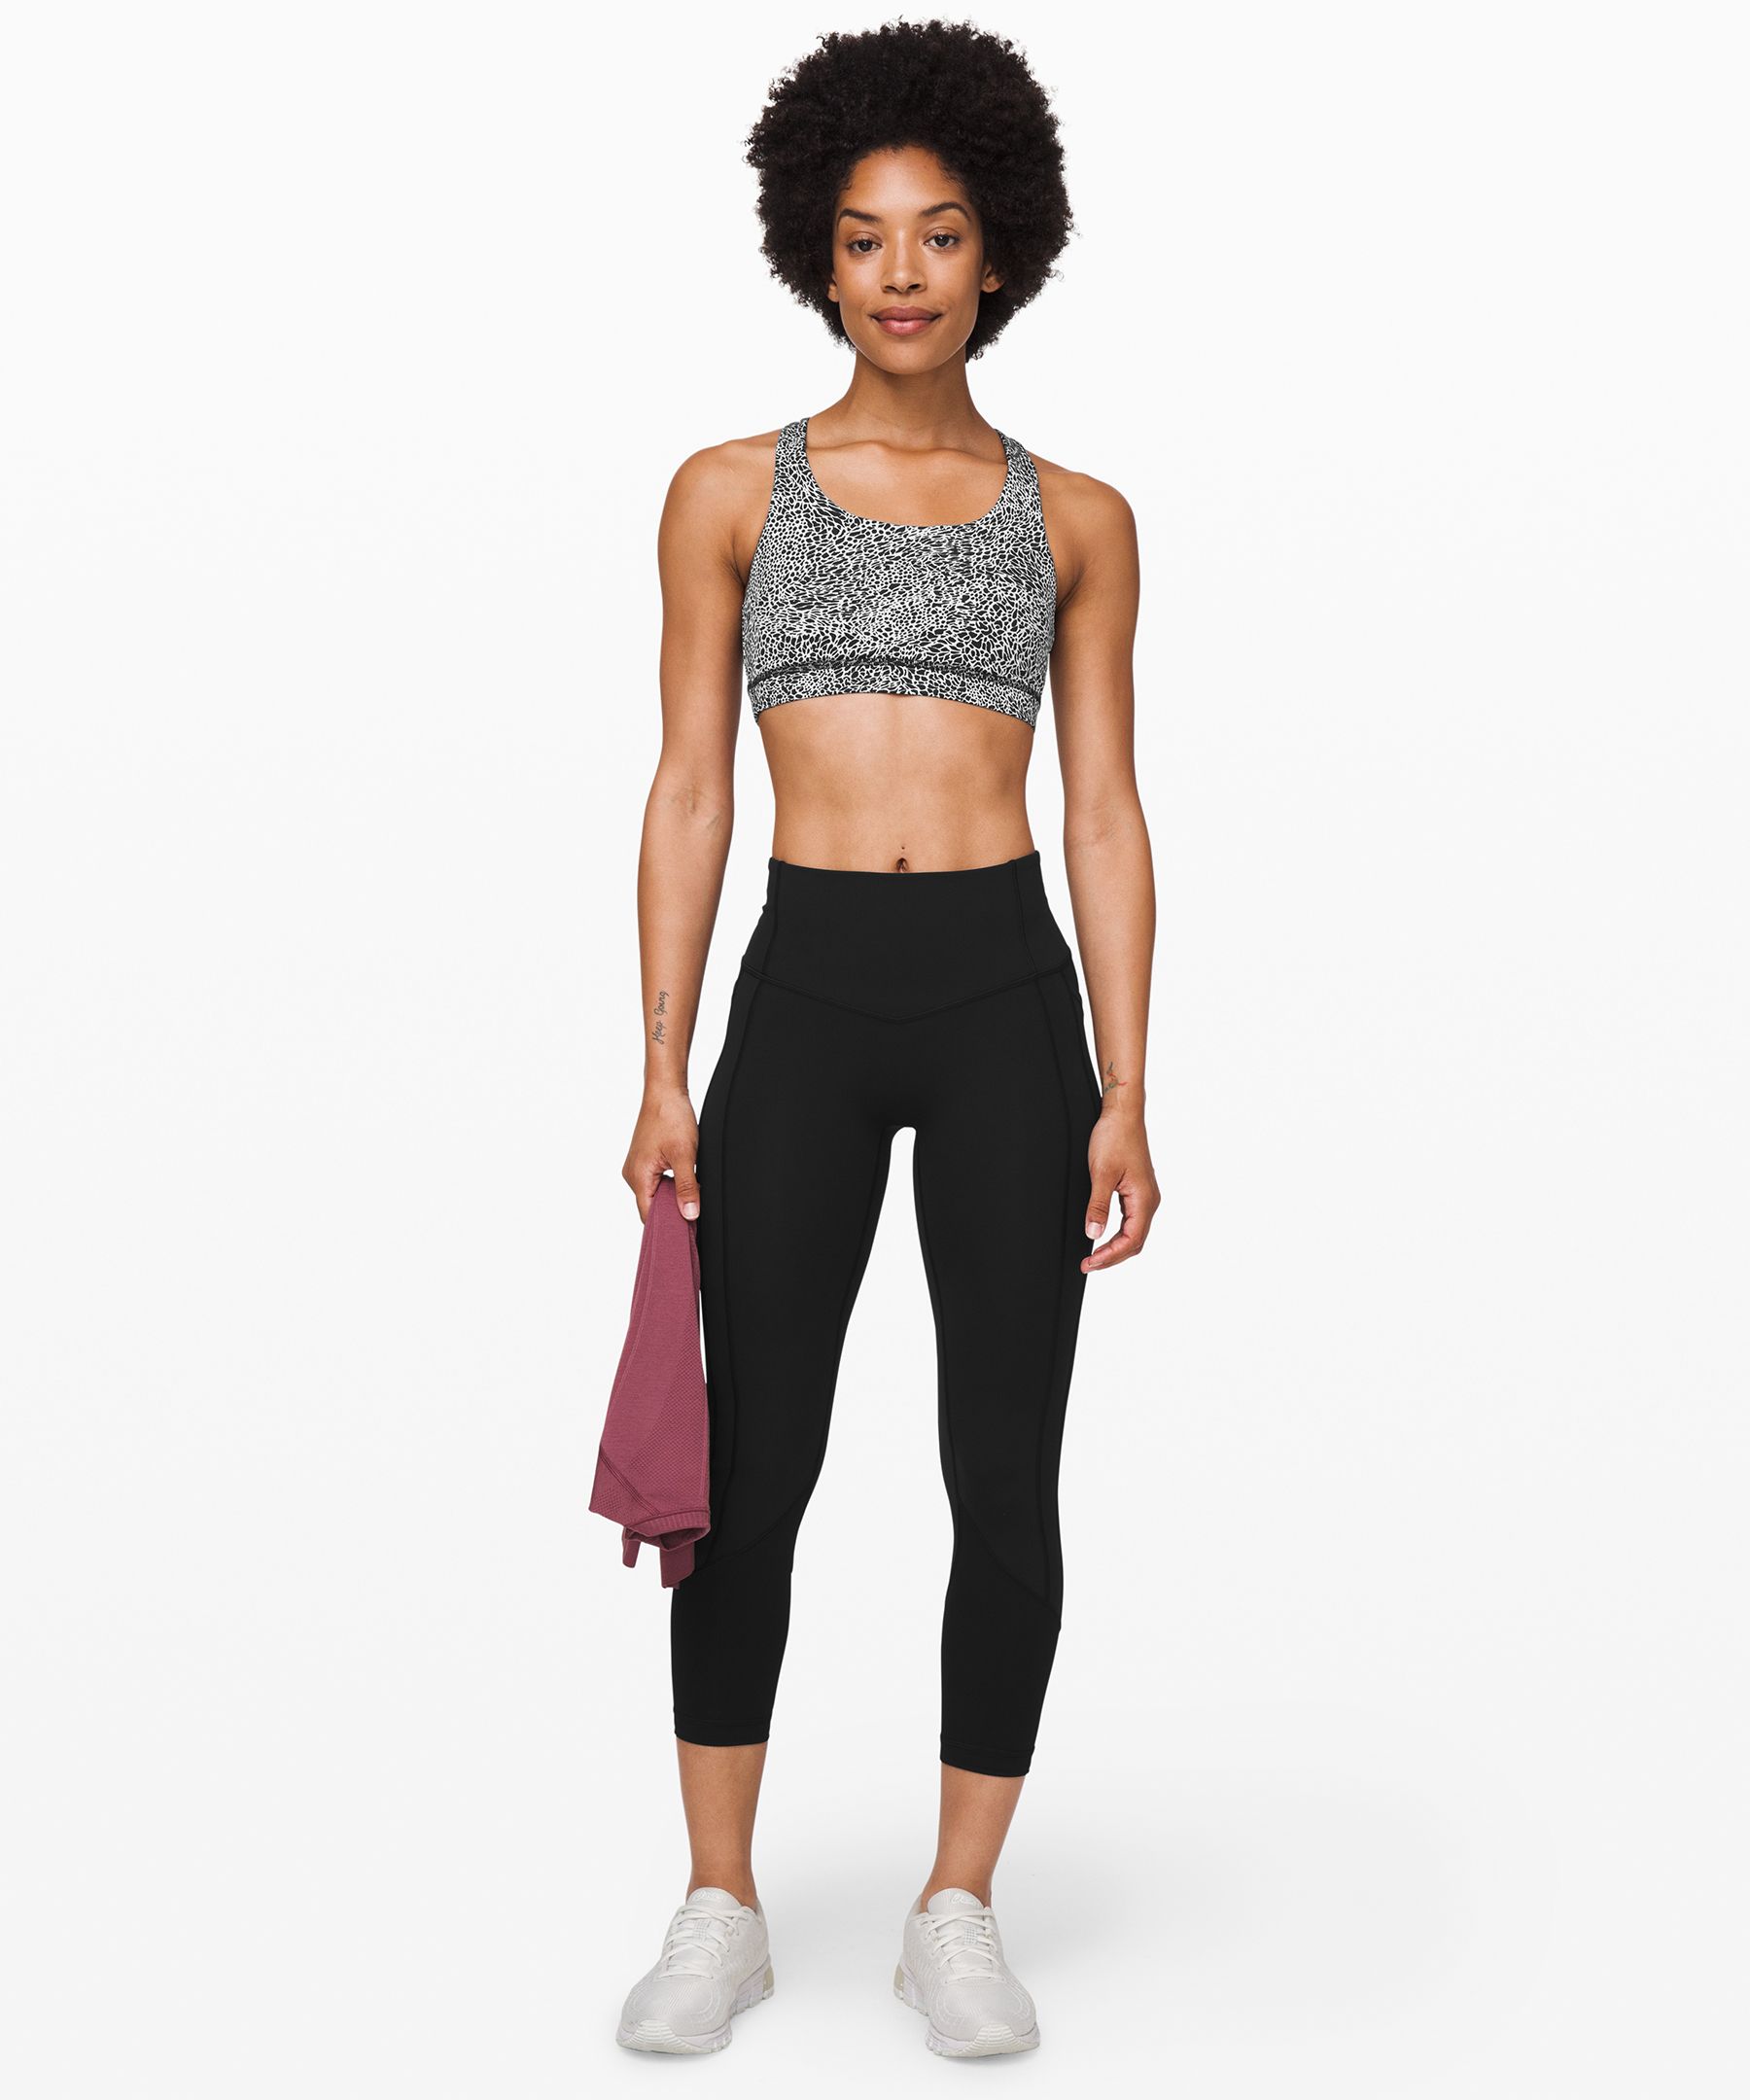 Home HIIT workout #ootd: invigorate bra in Spanish Oak and wunder